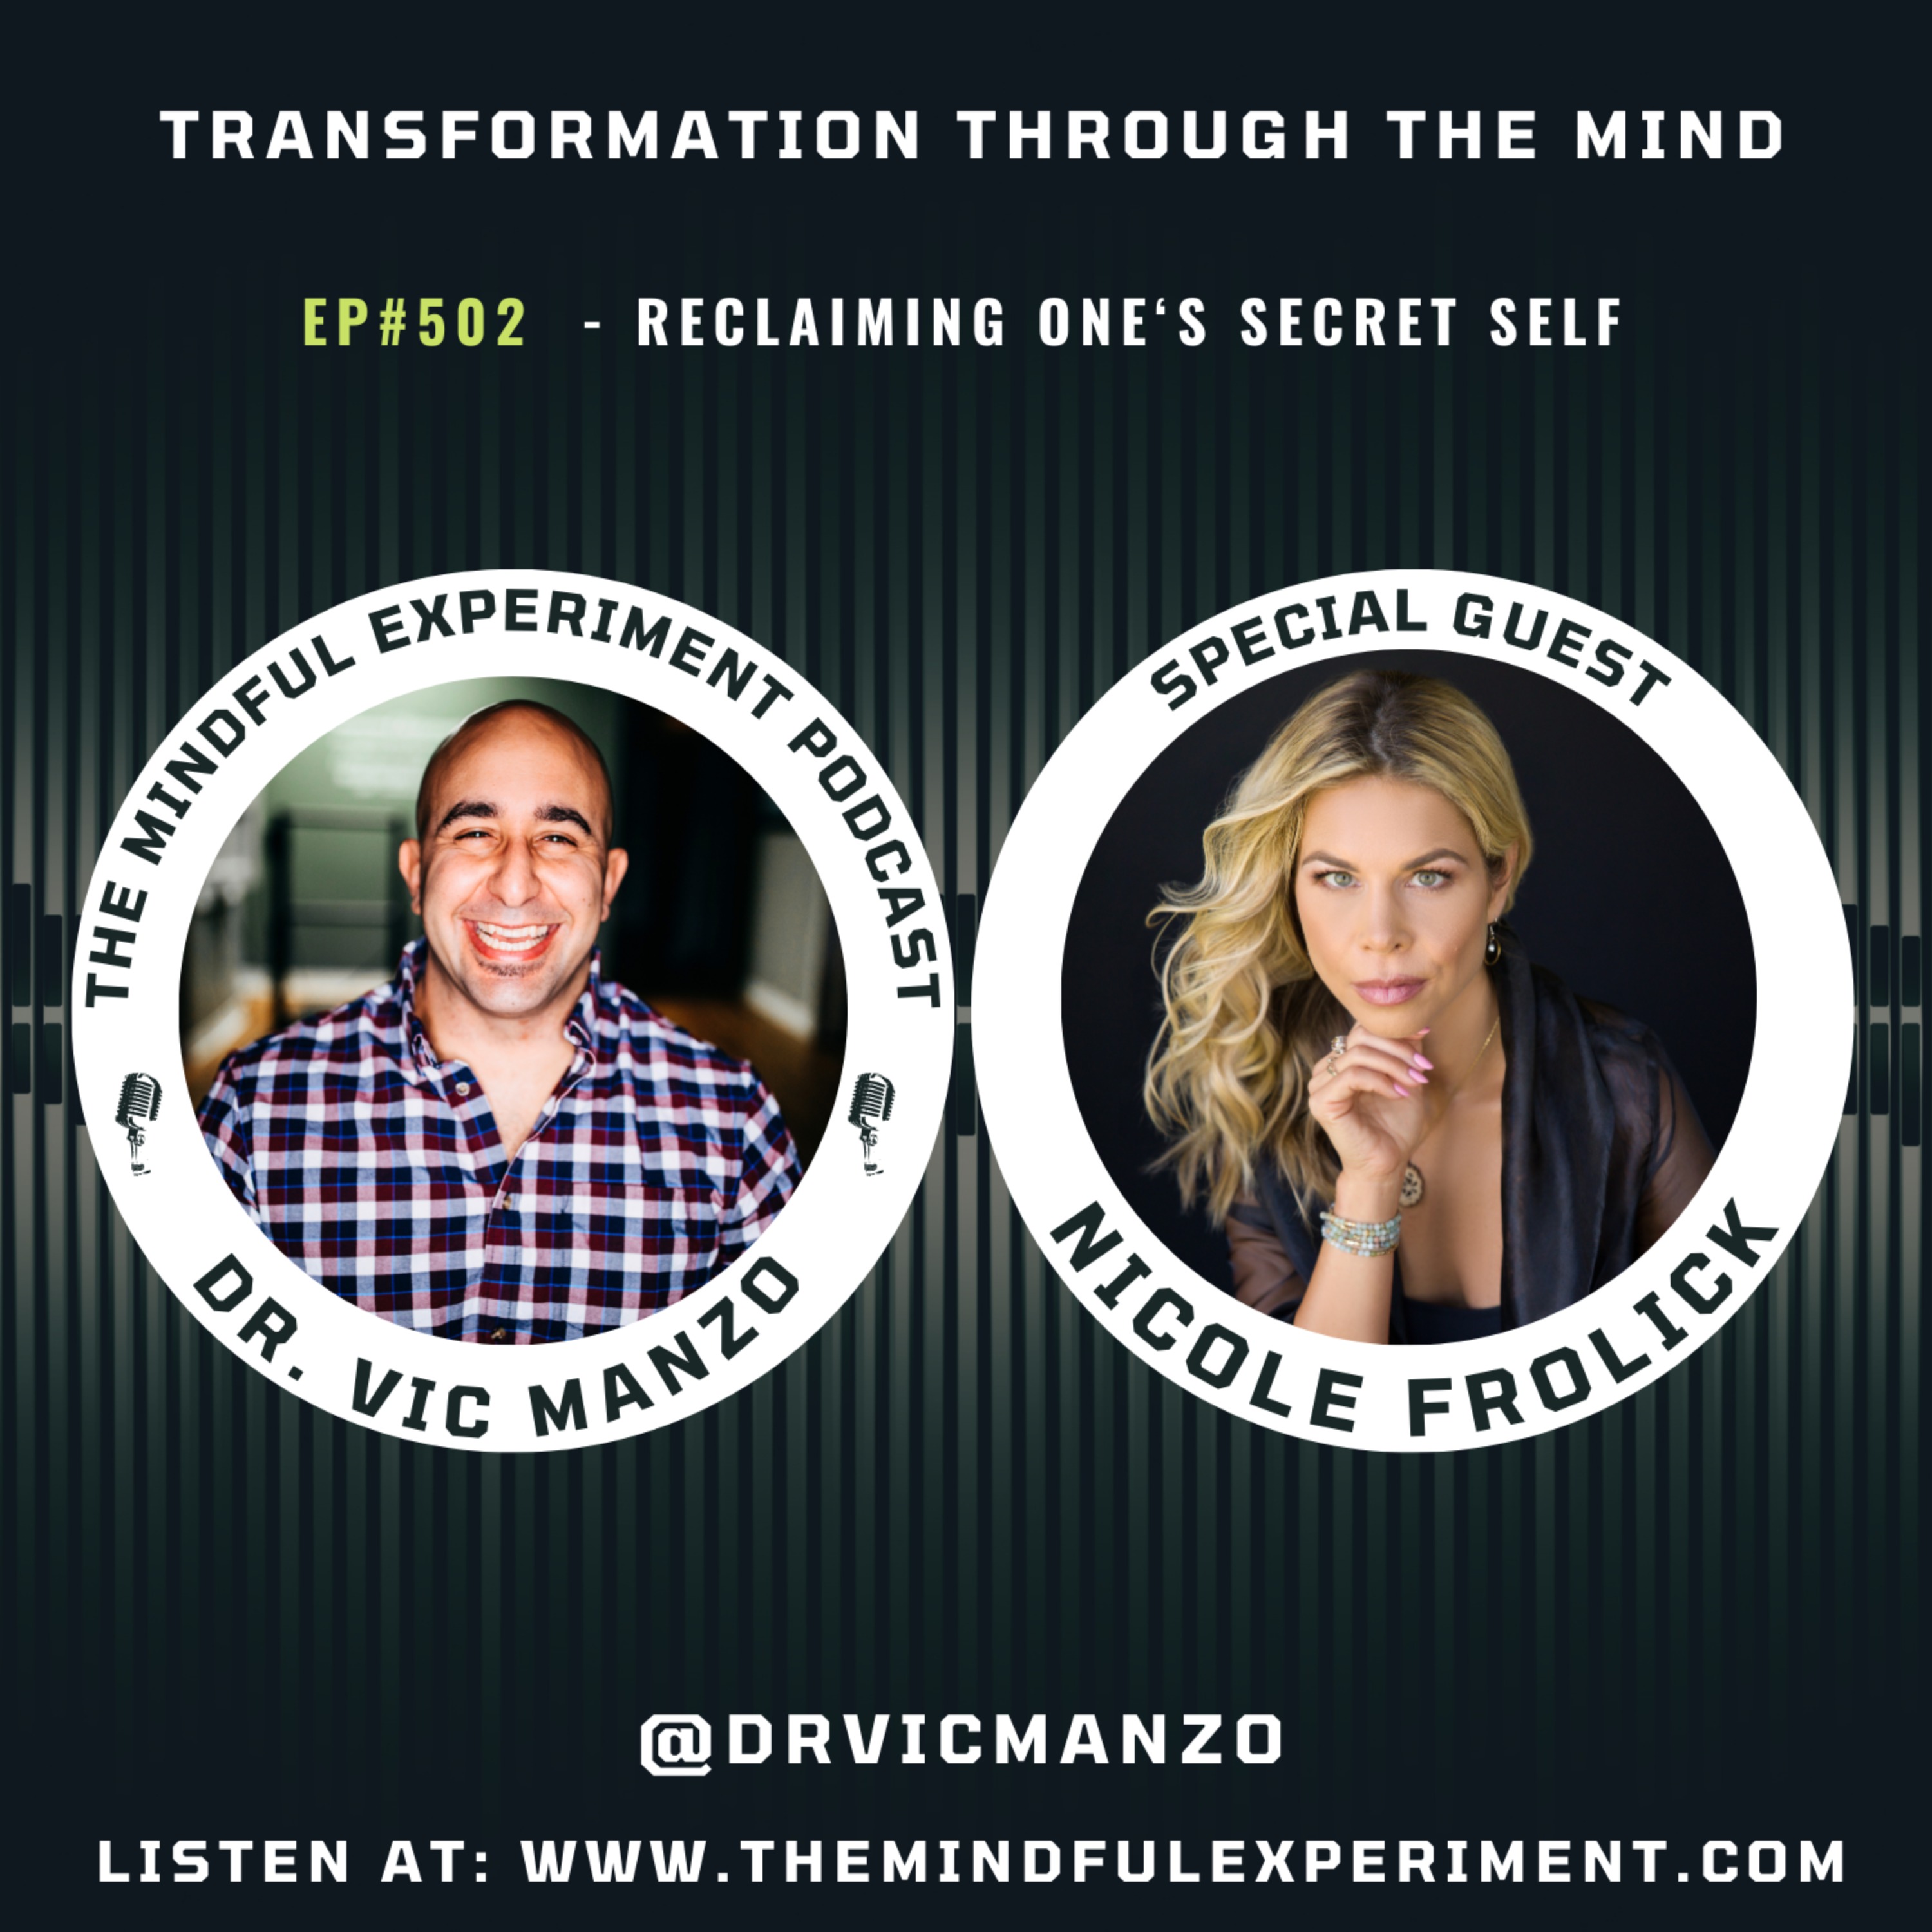 EP#502 - Reclaiming One’s Secret Self with Special Guest: Nicole Frolick